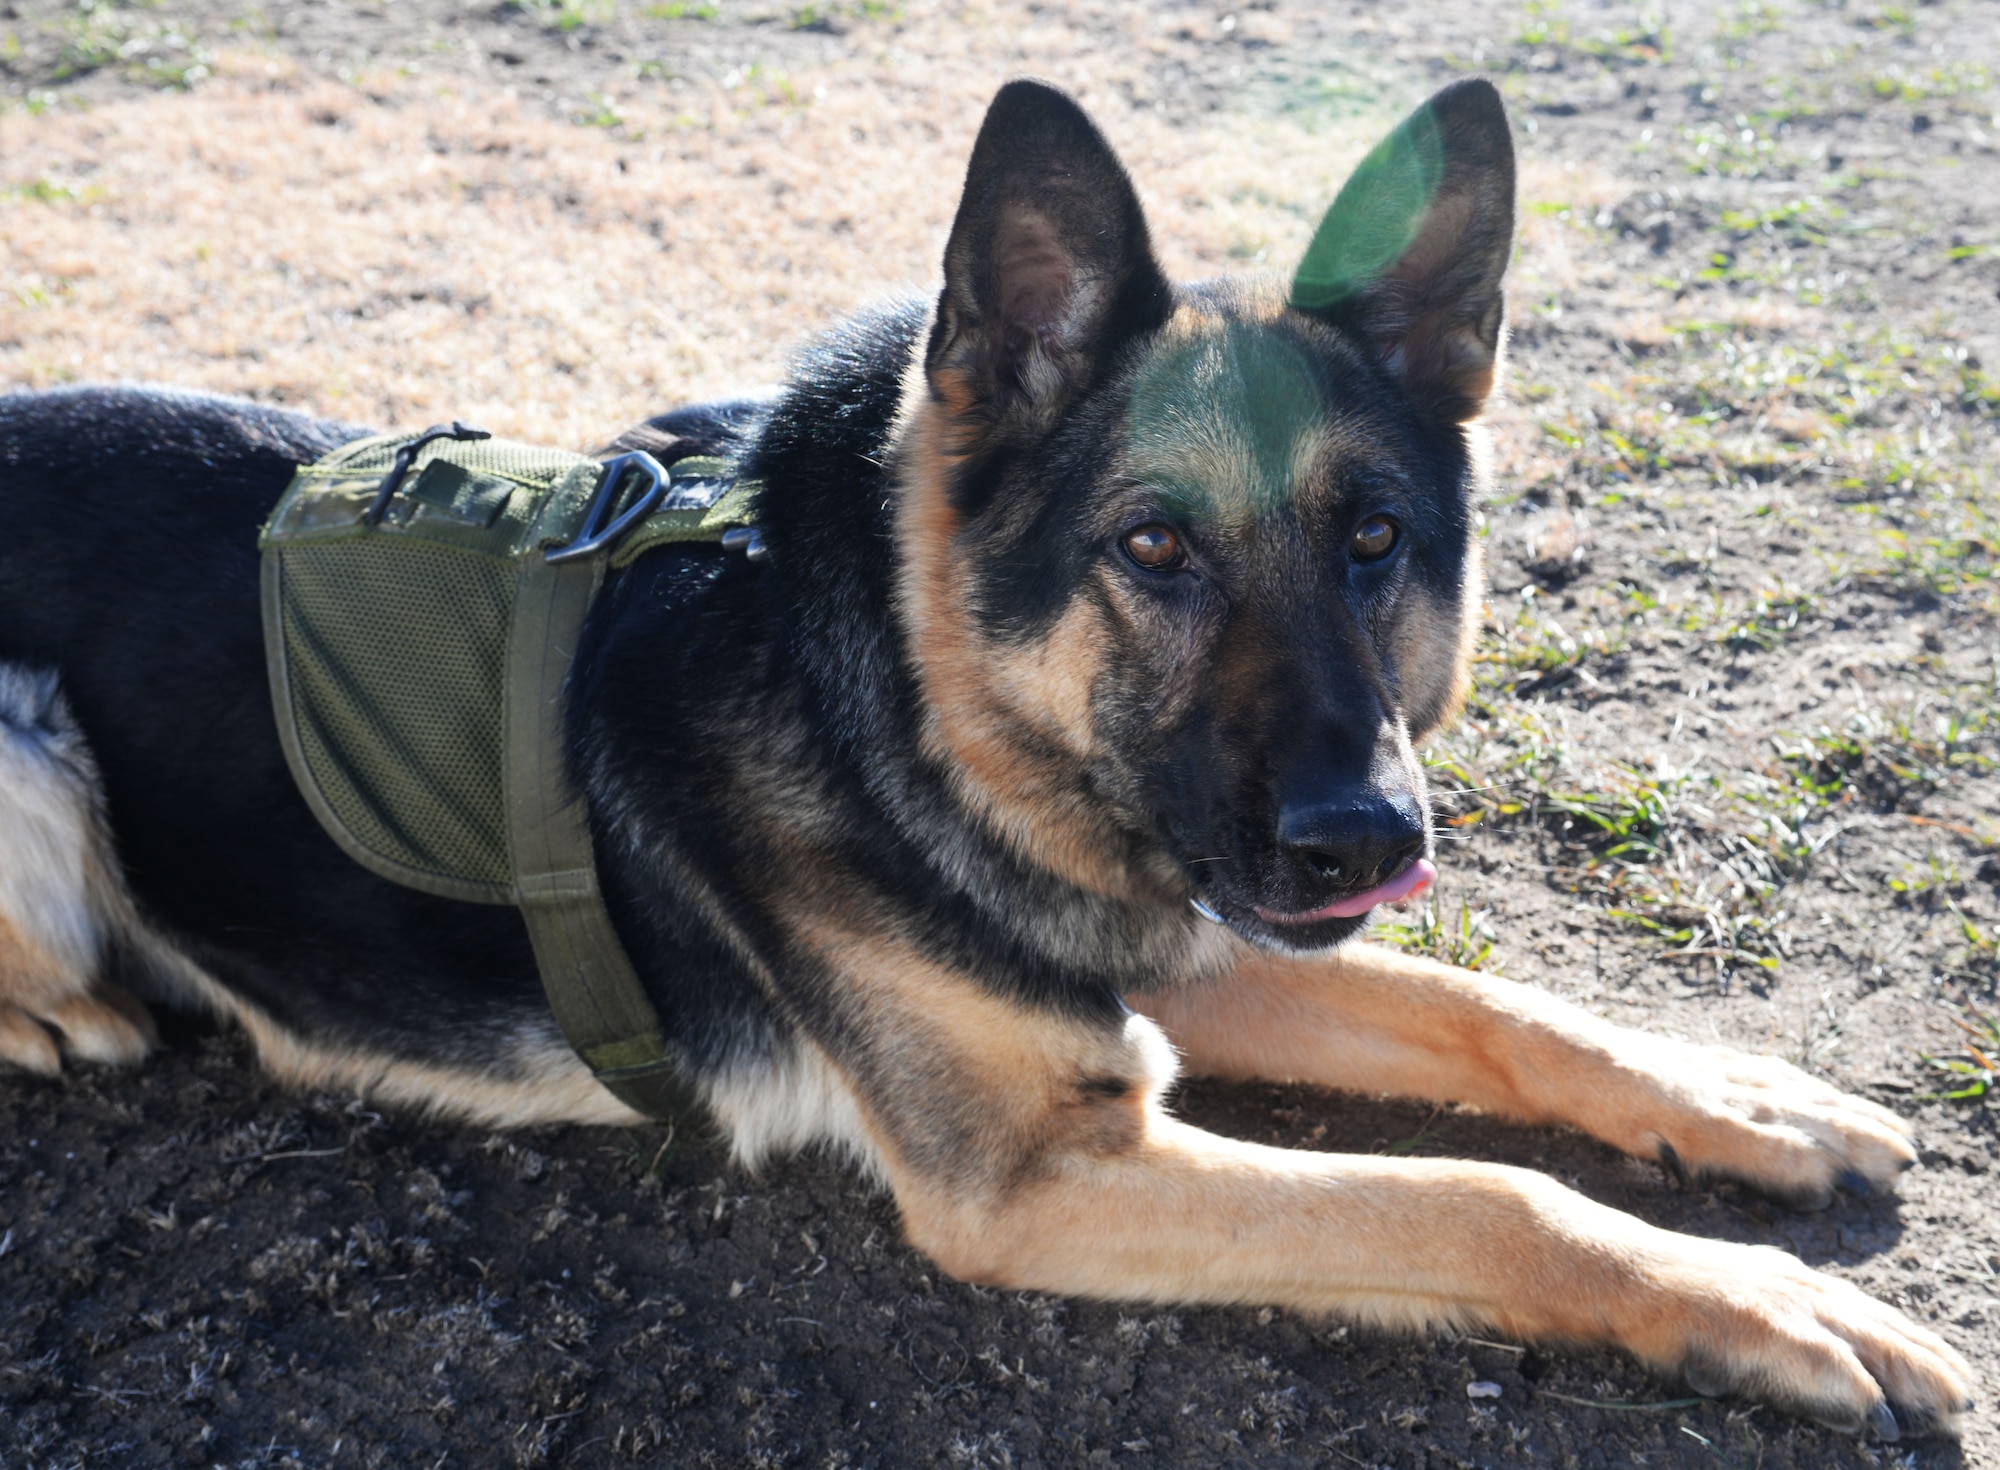 Mink, a Military Working Dog assigned to the 28th Security Forces Squadron, lays down on command at Ellsworth Air Force Base, S.D., Oct. 31, 2017. Treatment for MWDs such as Mink are the primary responsibility of the Veterinary Treatment Facility on base to make certain they are healthy and fit for service. (U.S. Air Force Photo by Airman 1st Class Thomas Karol)